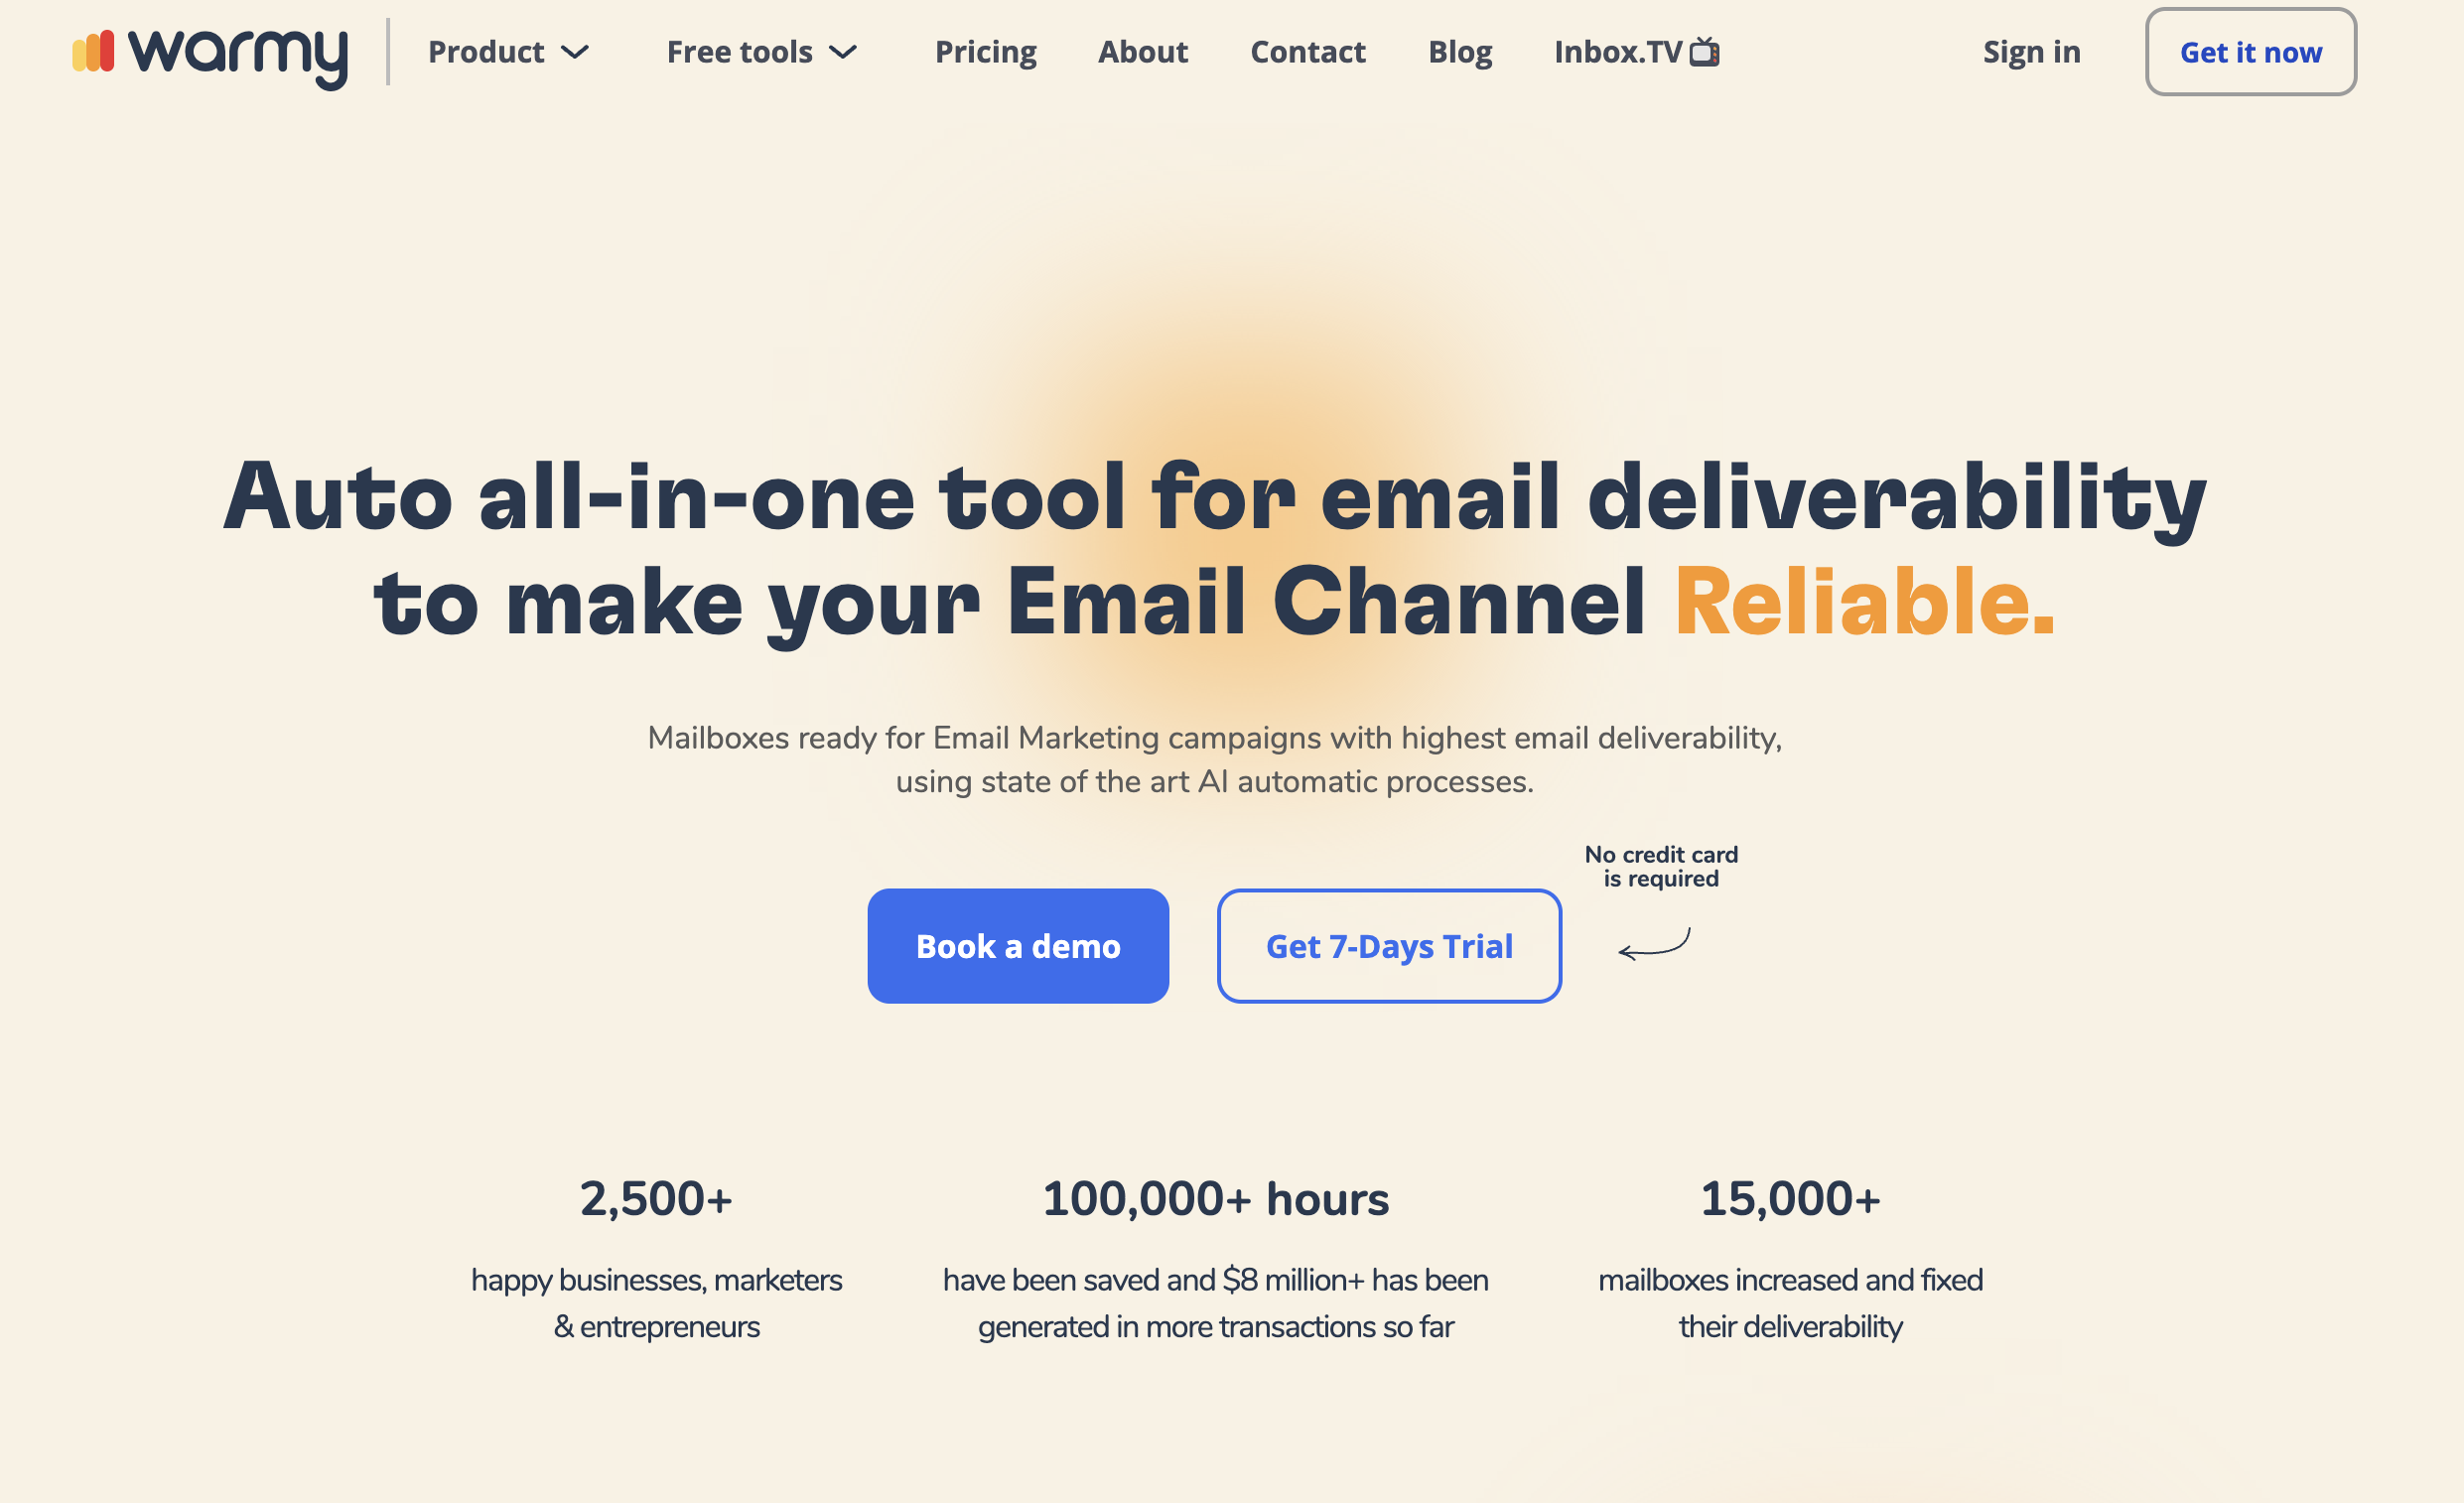 Warmy.io : Improve email deliverability + Partner and Earn